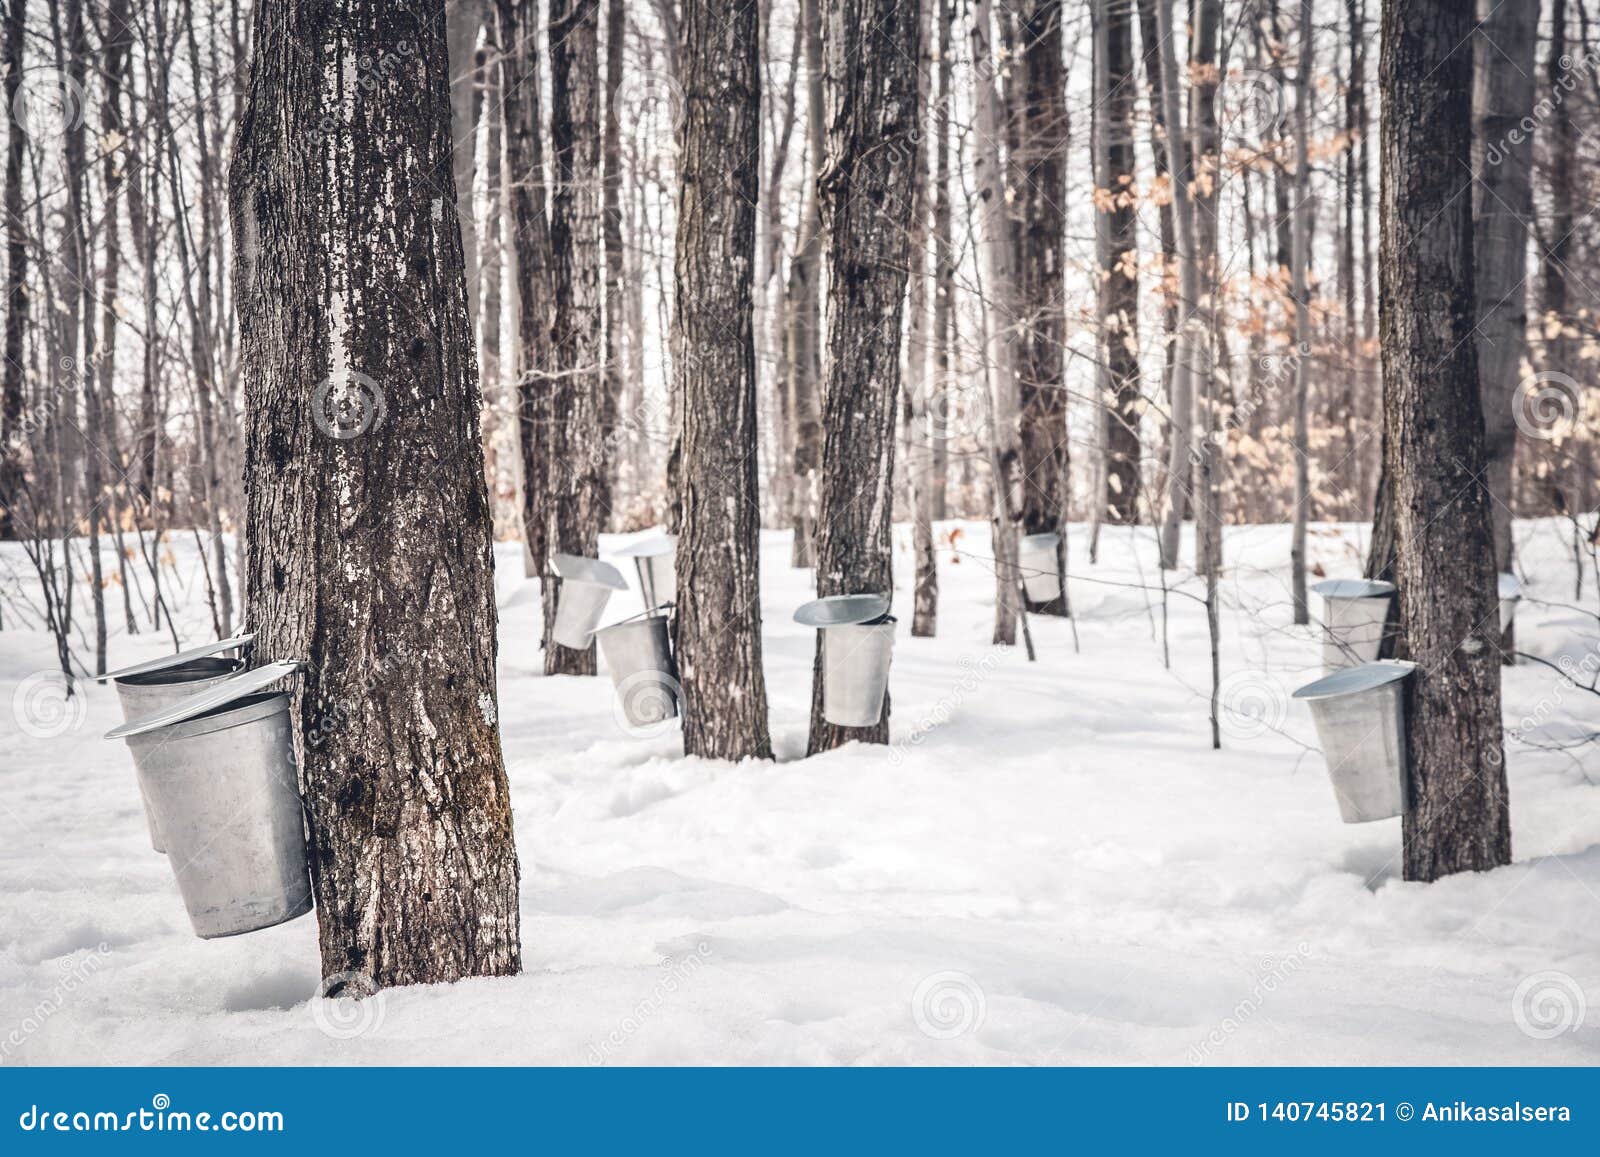 maple syrup production in quebec